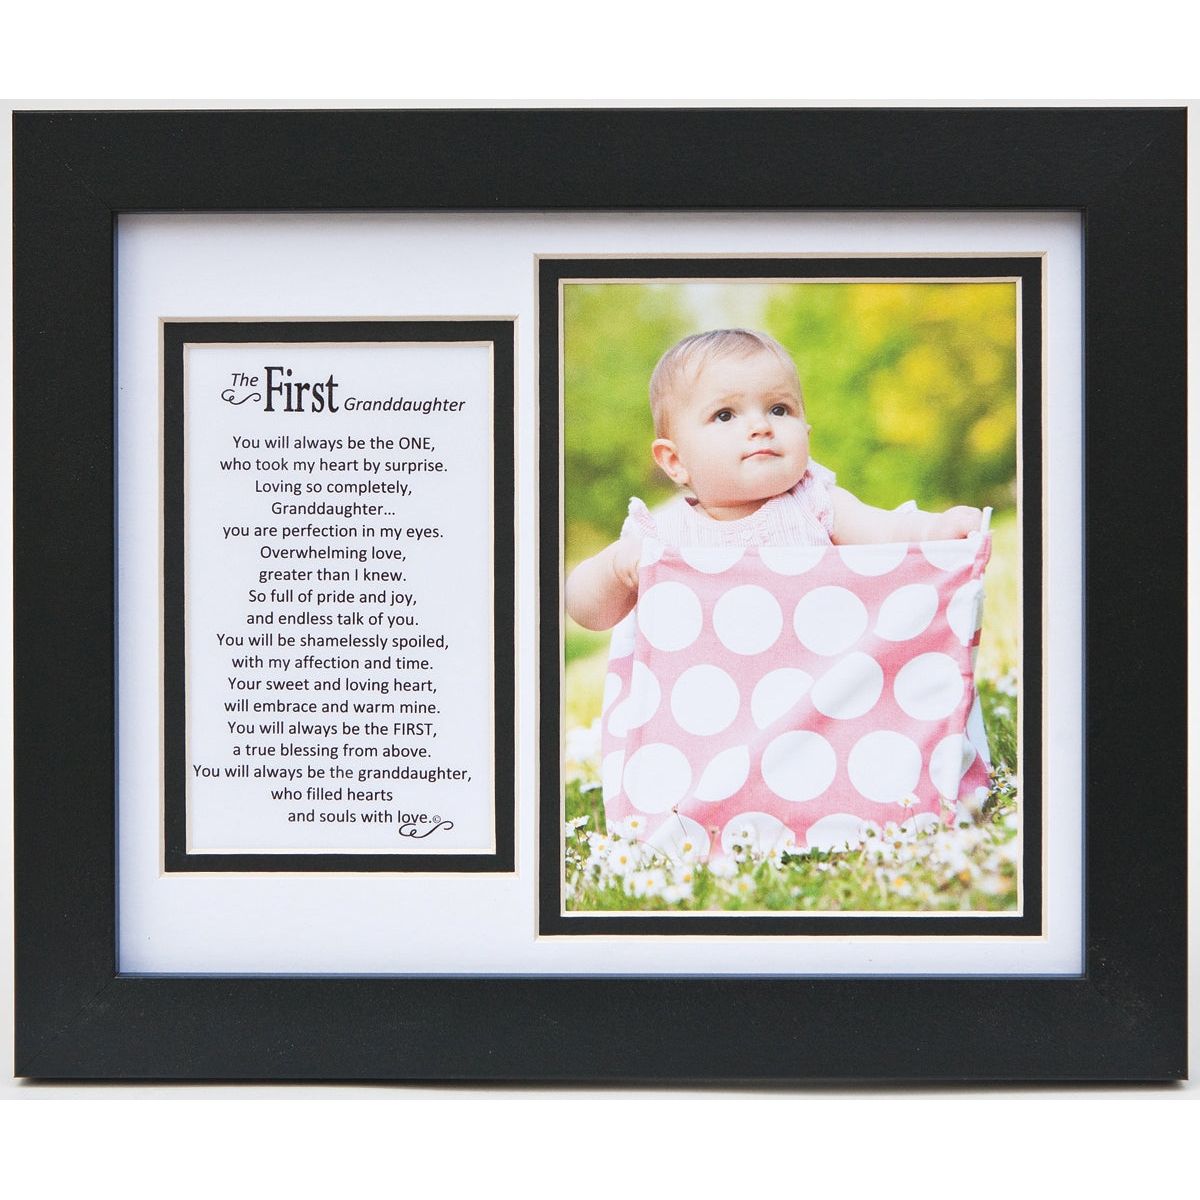 8x10 black frame with white and black double mat, includes &quot;First Granddaughter&quot; poem and space for photo.